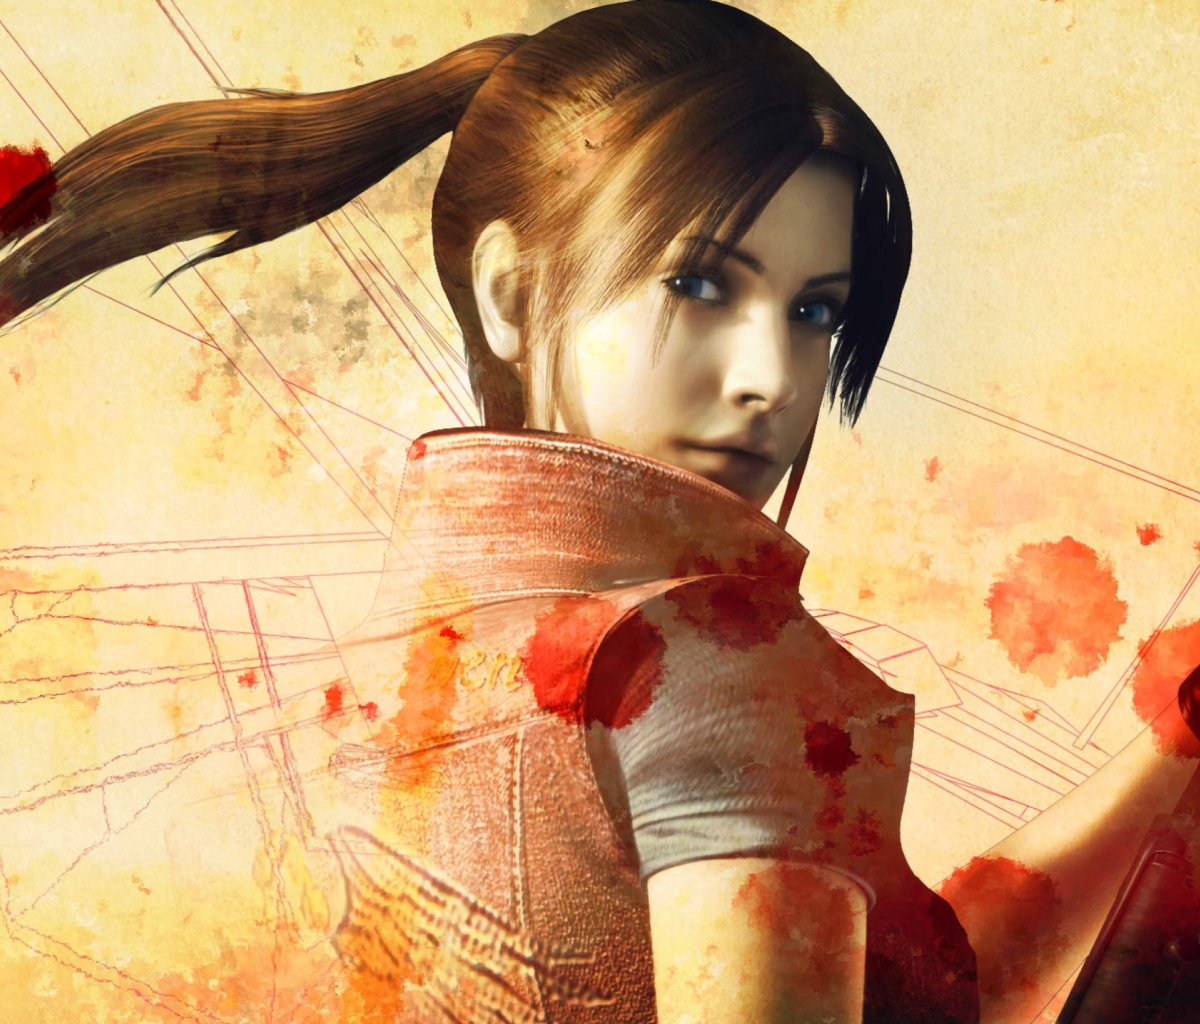 Resident Evil Claire Redfield wallpaper 1200x1024